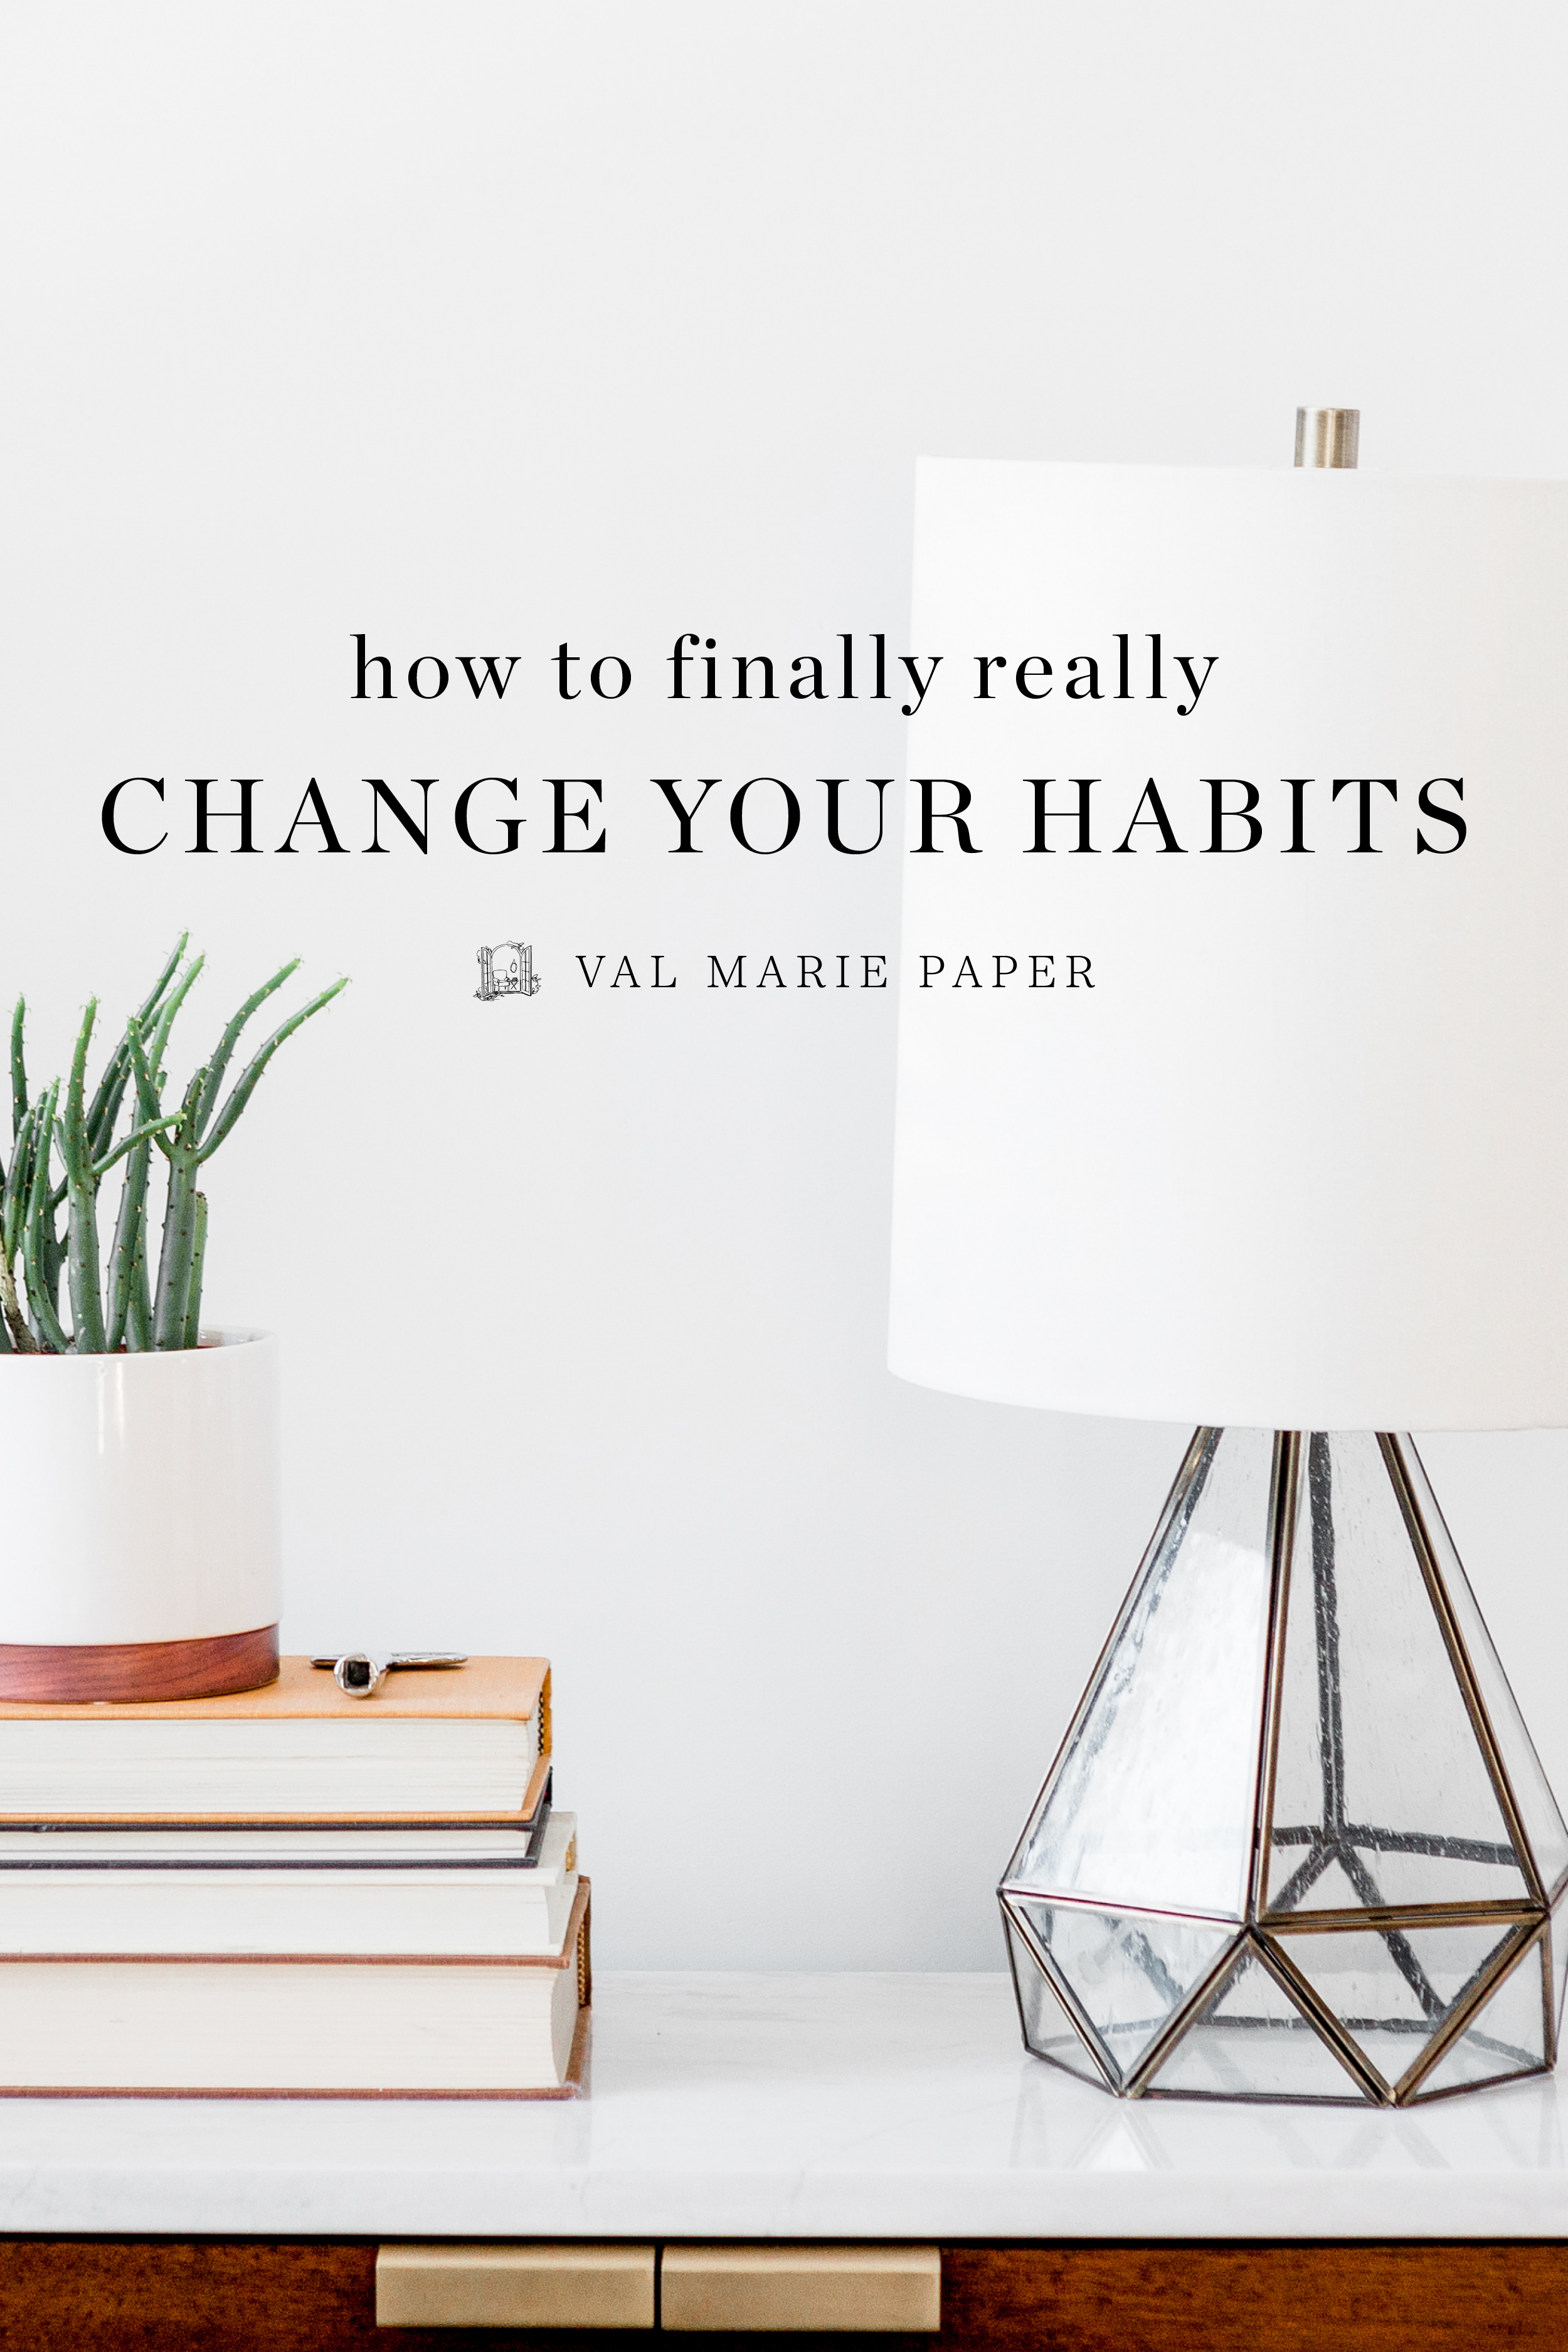 How to Change Your Habits by Valerie Woerner, habits, goals, living well, intentional living